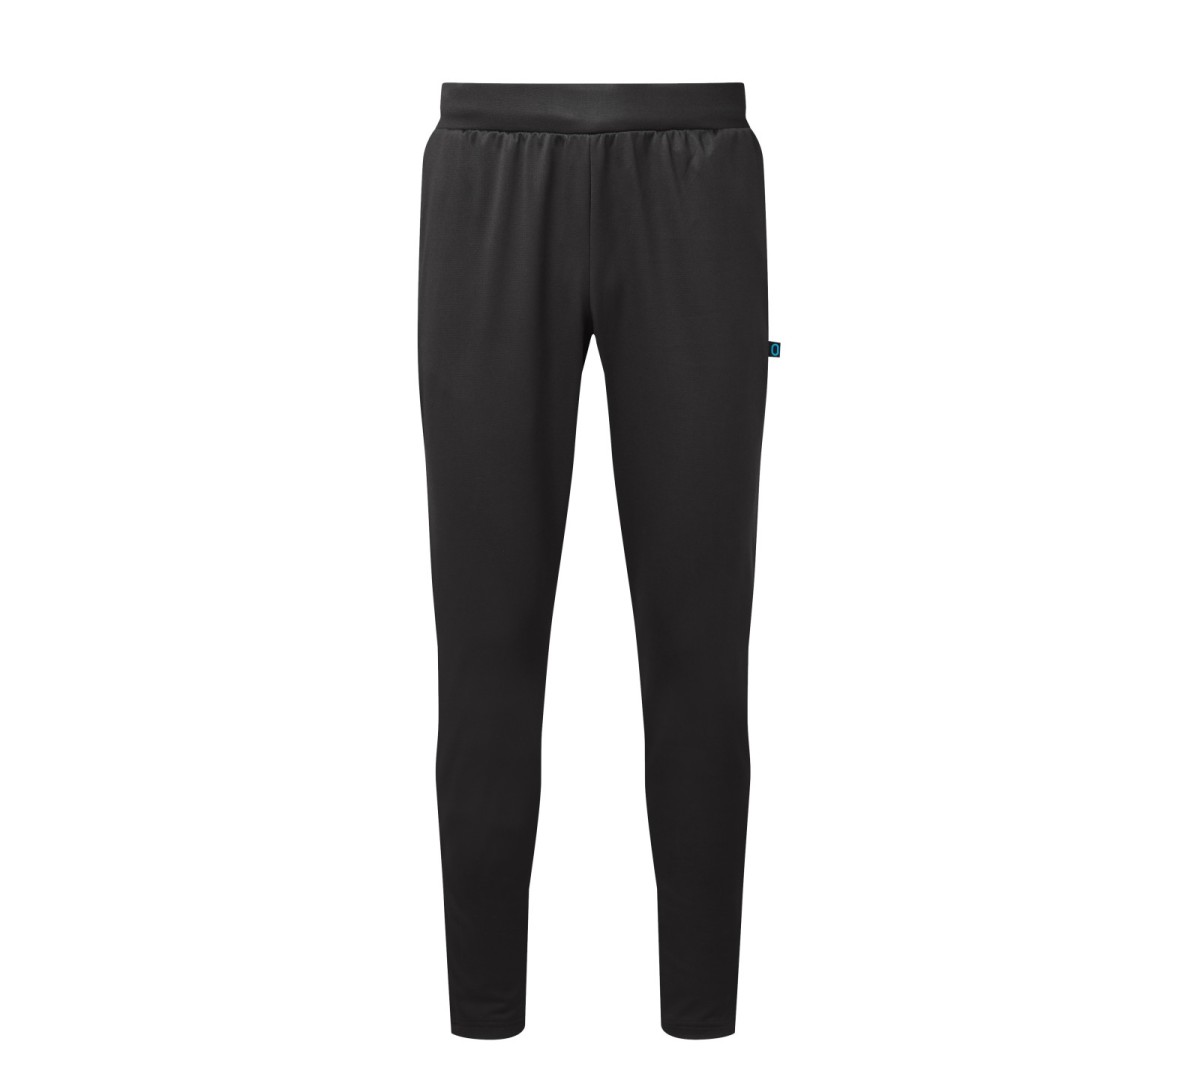 Black Training Pant - Forsters School Outfitters (Sittingbourne)